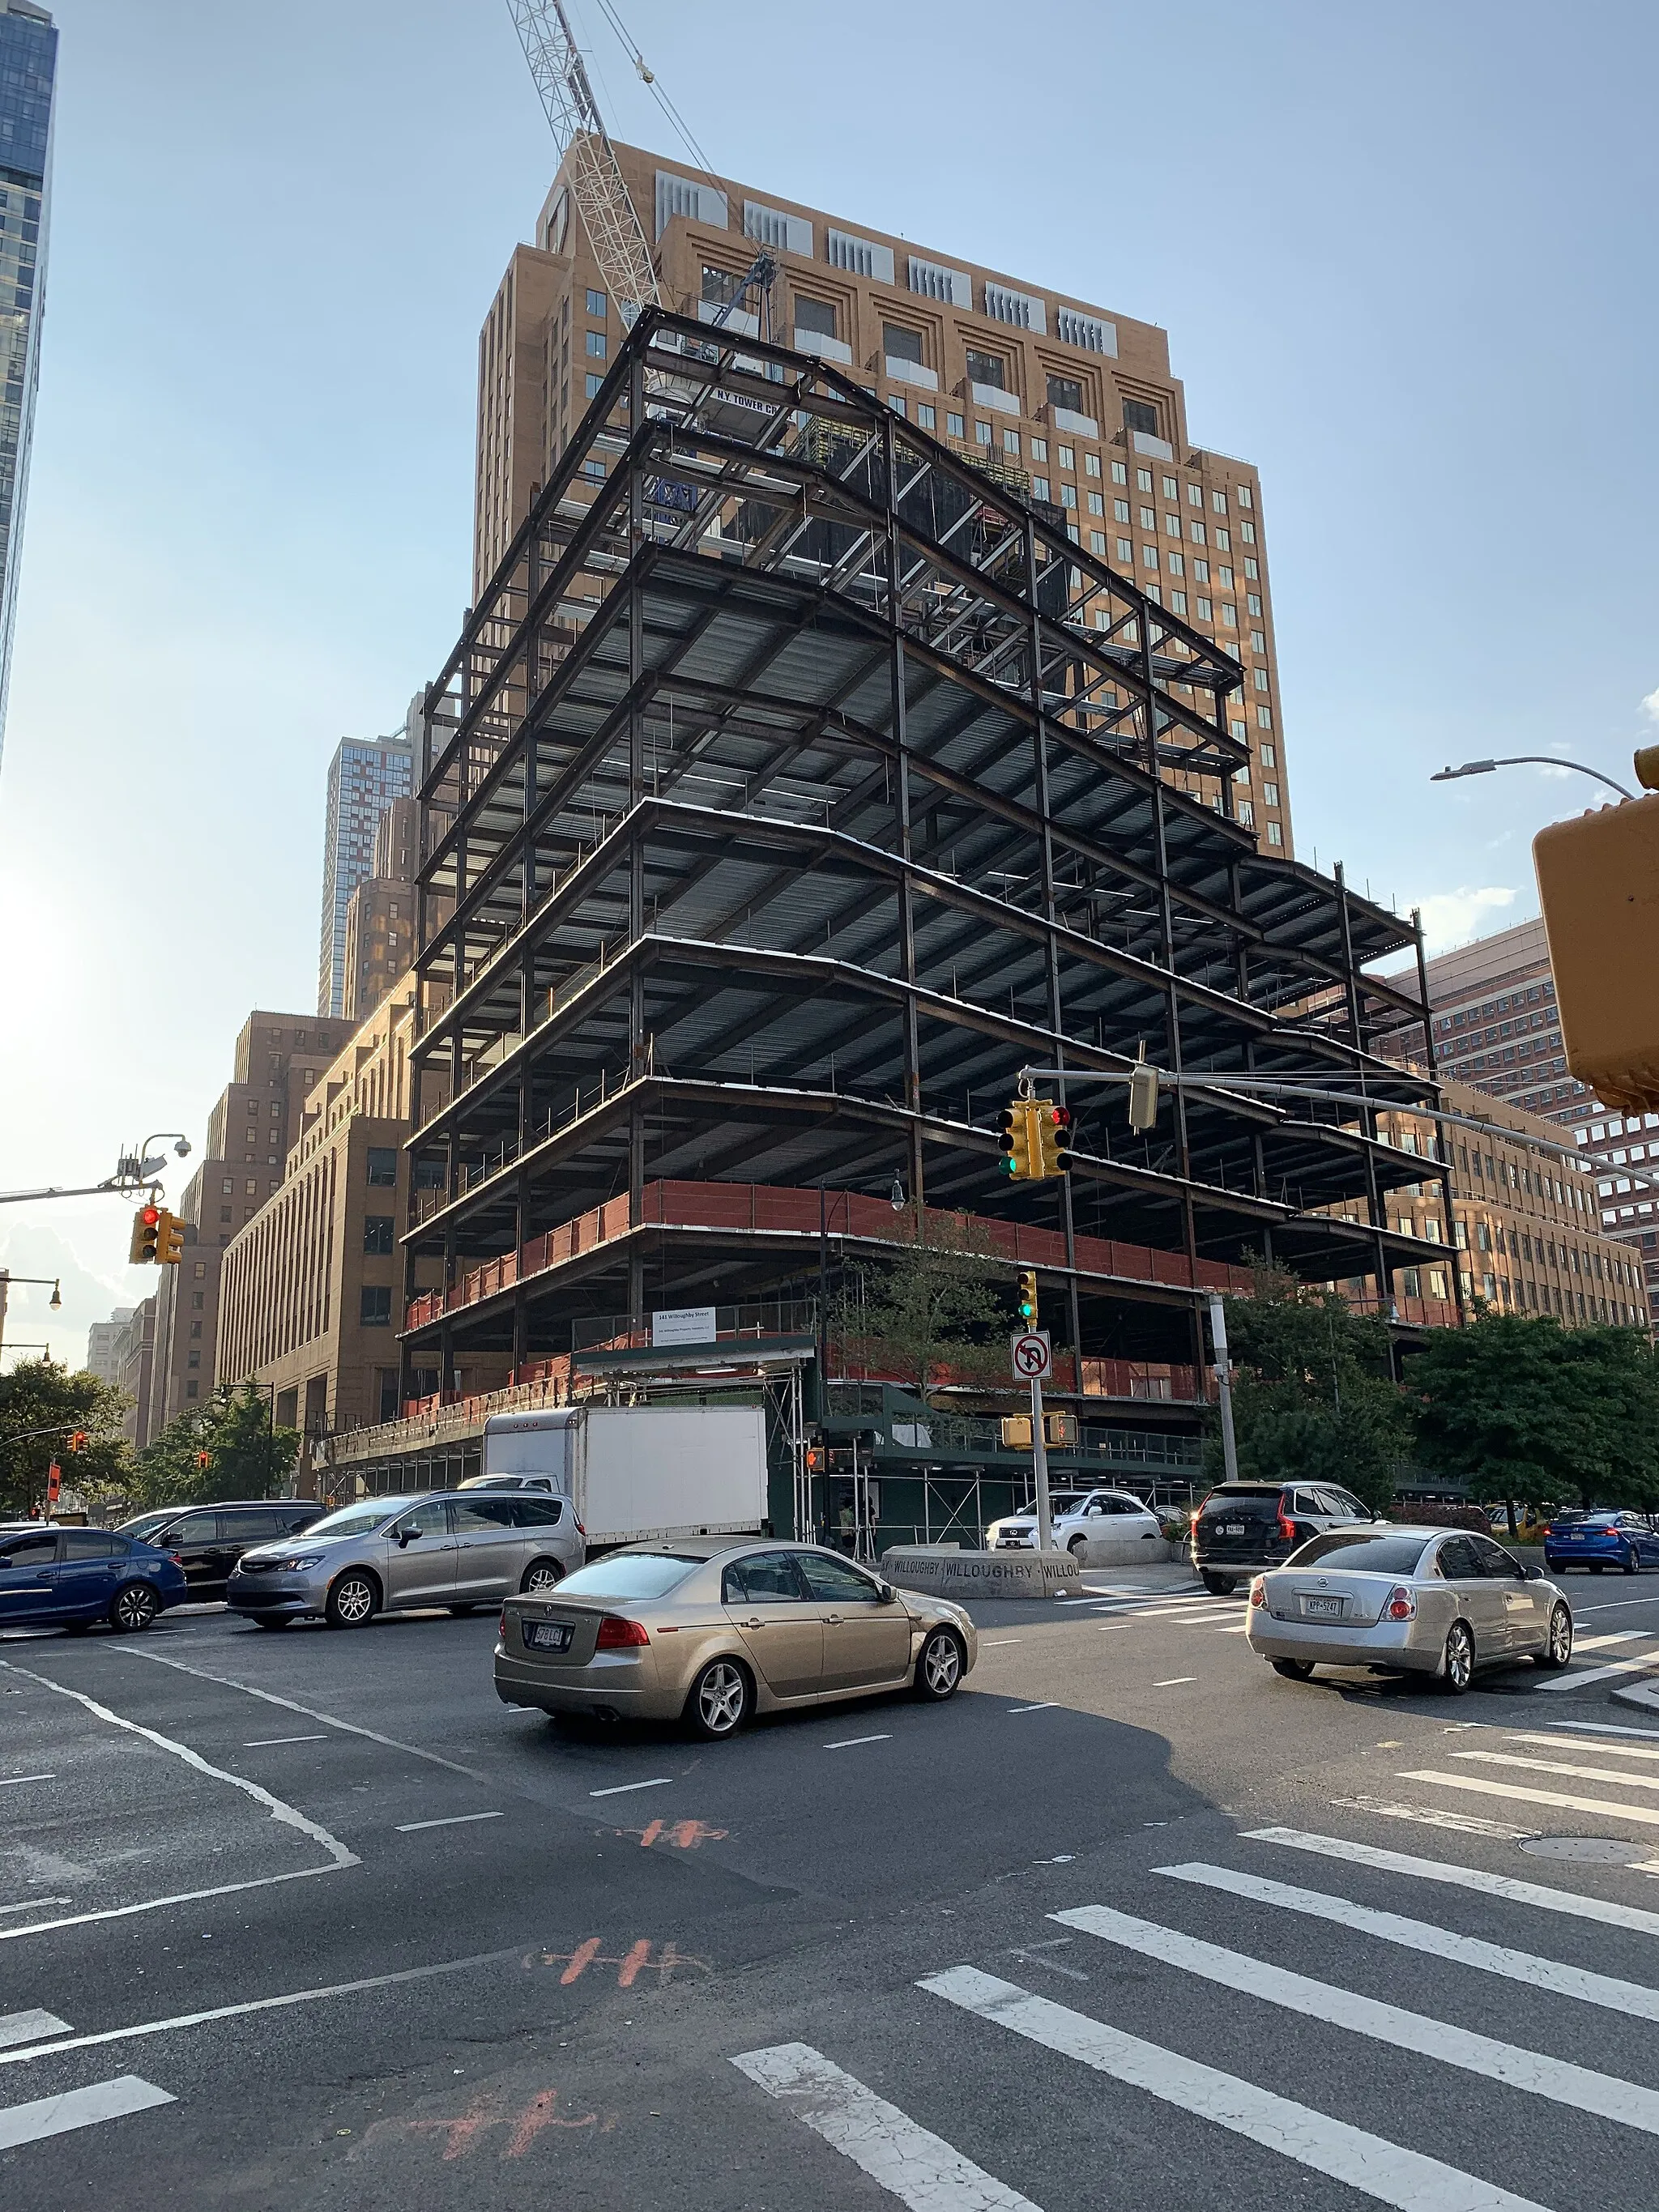 Photo showing: 141 Willoughby Street under construction, looking west, in Downtown Brooklyn, New York on August 25, 2021.